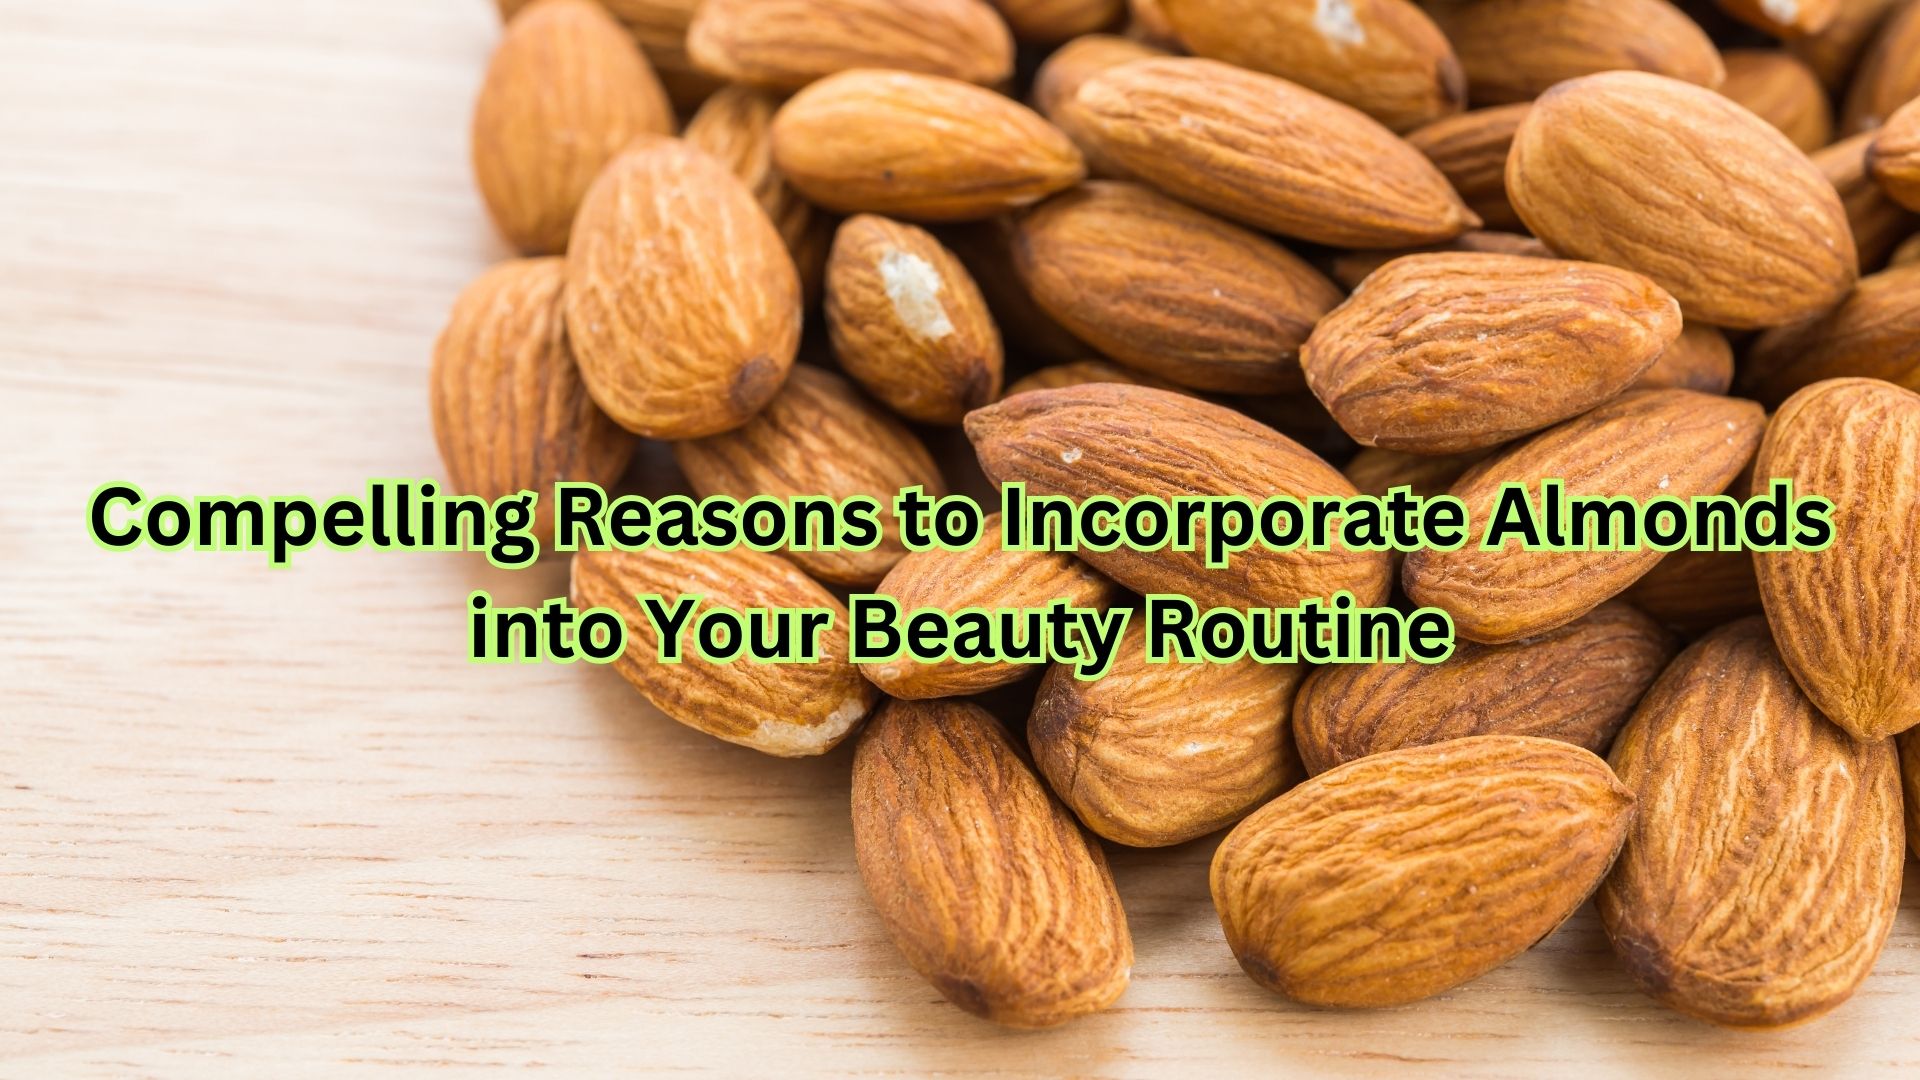 Compelling Reasons to Incorporate Almonds into Your Beauty Routine